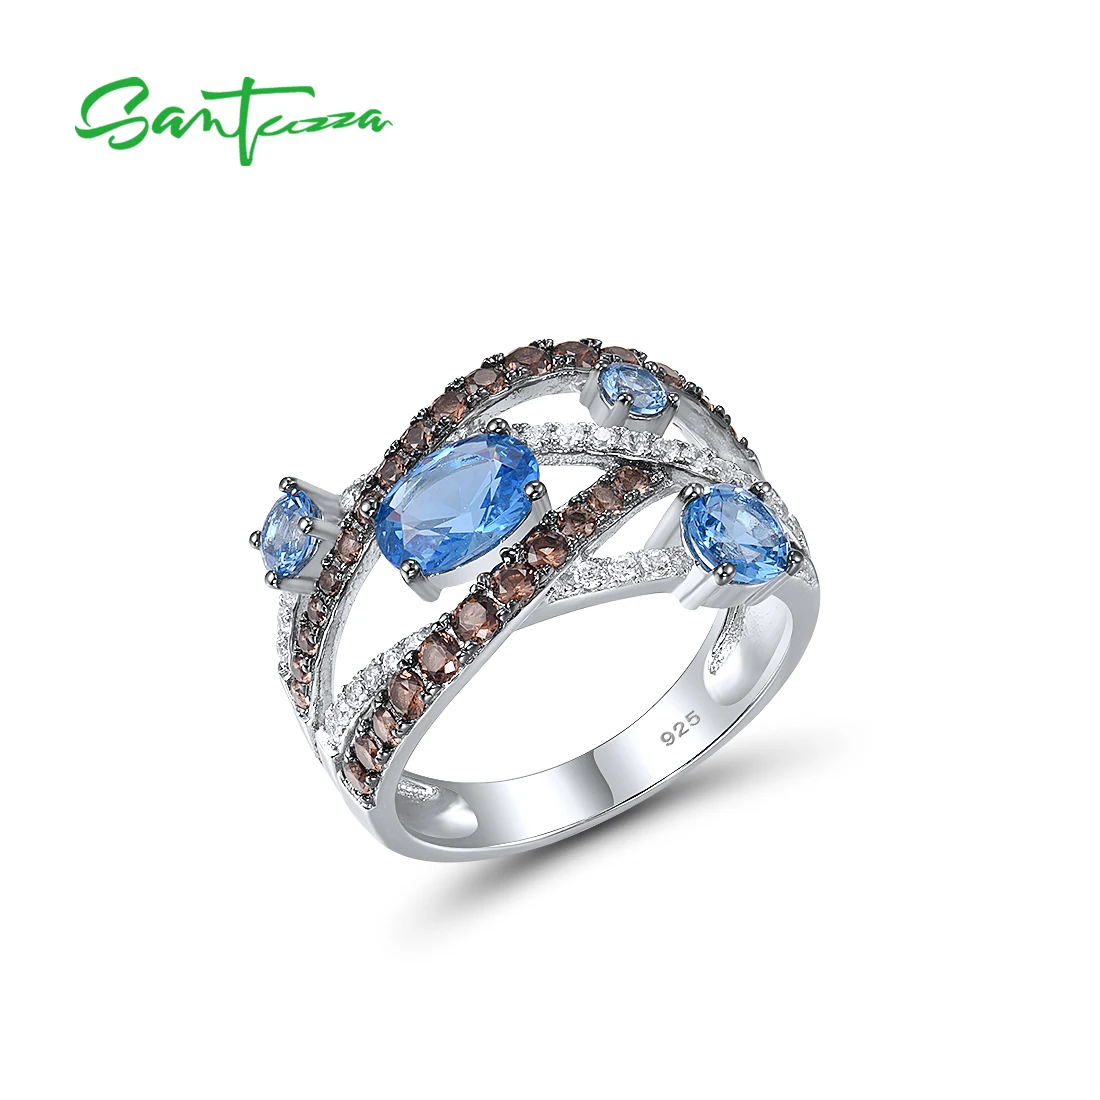 SANTUZZA Authentic 100% 925 Sterling Silver Rings For Women Sparkling Brown Blue Spinel White CZ Dazzling  Trendy Fine Jewelry